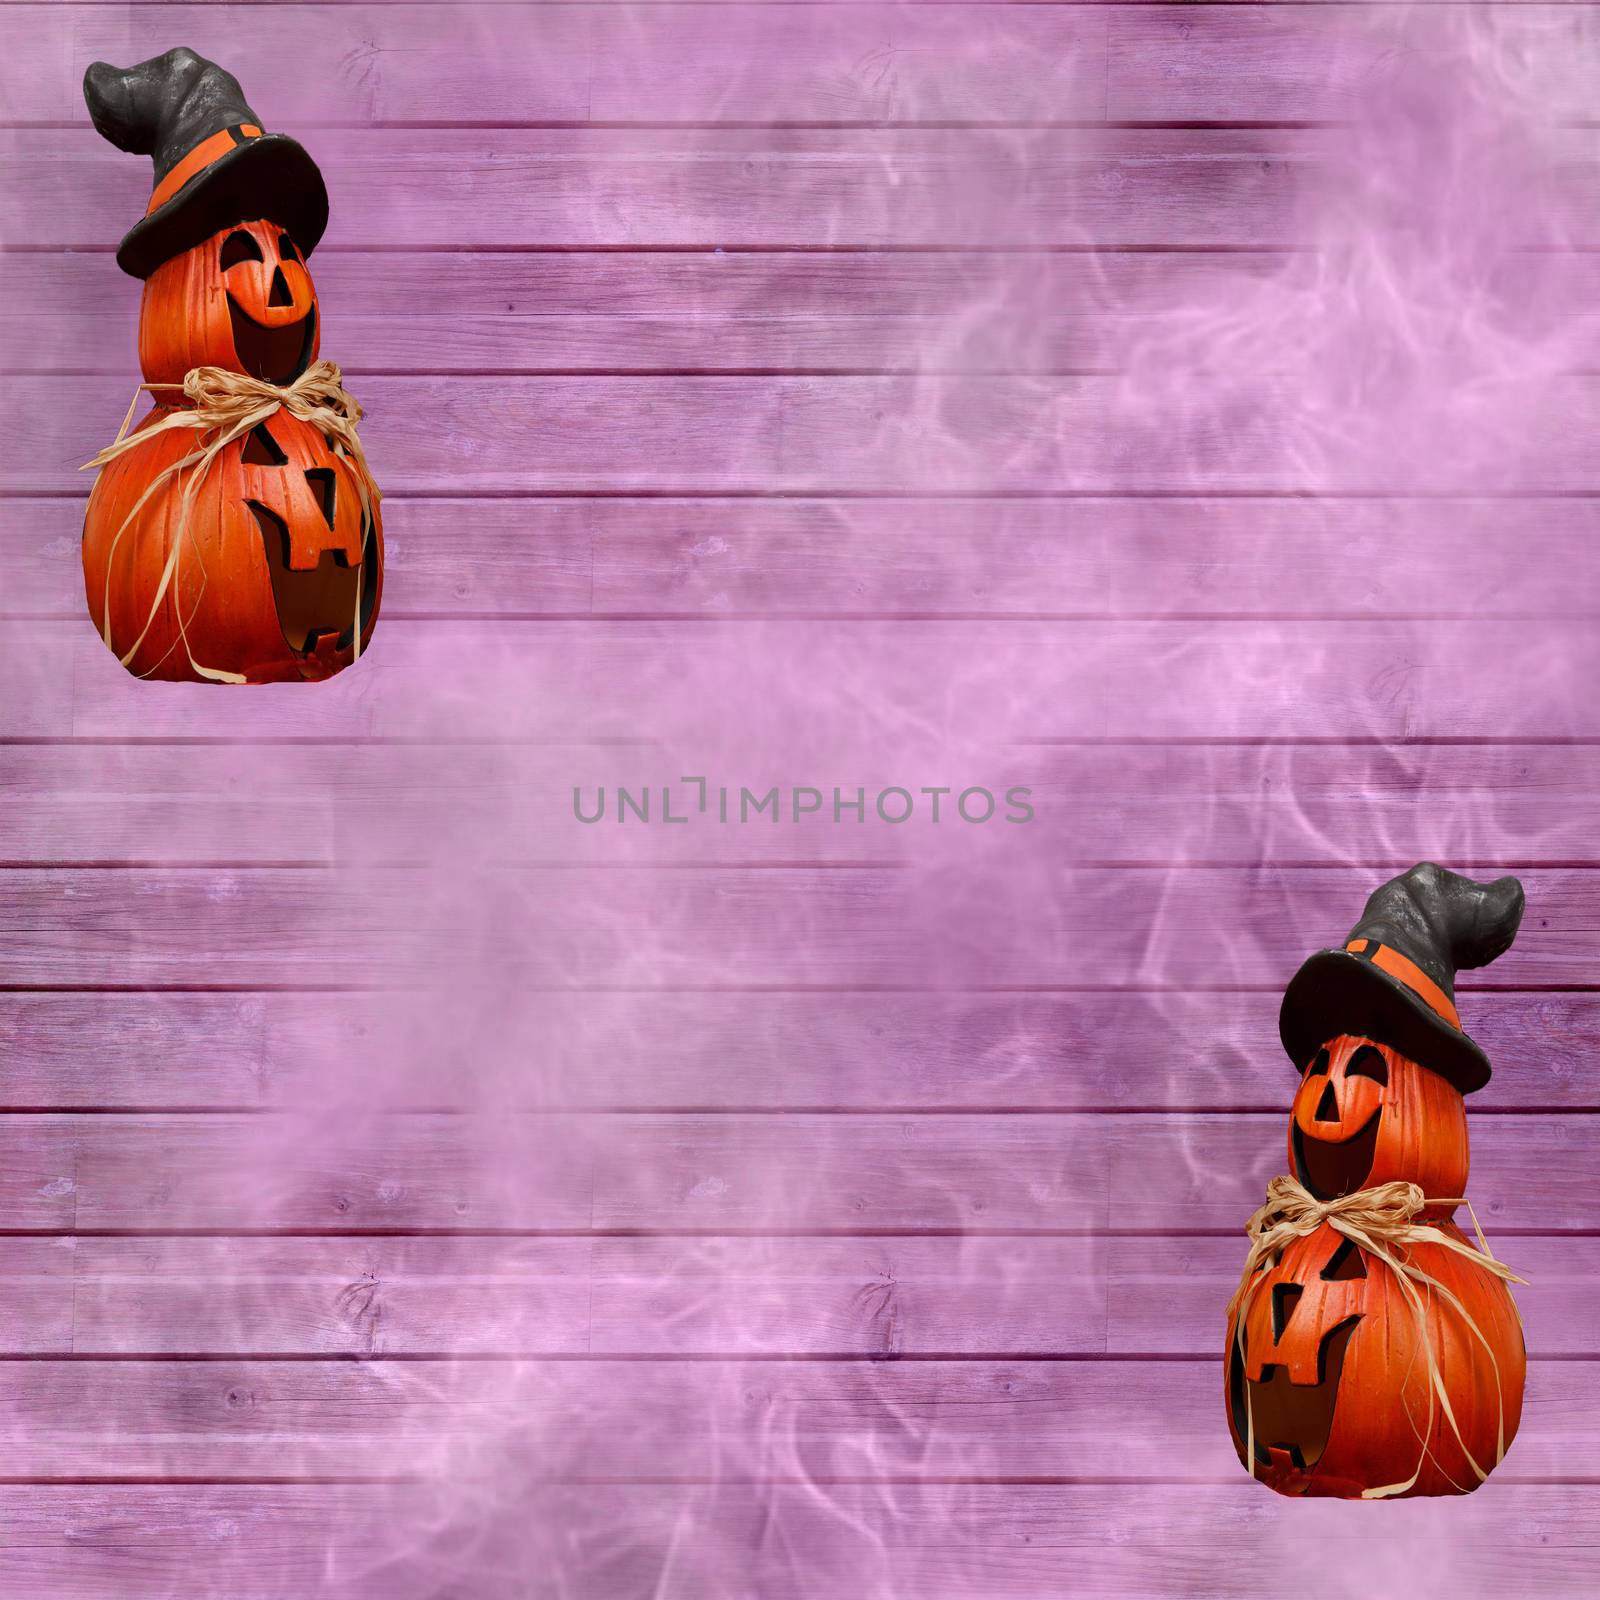 Halloween celebration background with purple wooden planks and carved pumpkins with a witch hat